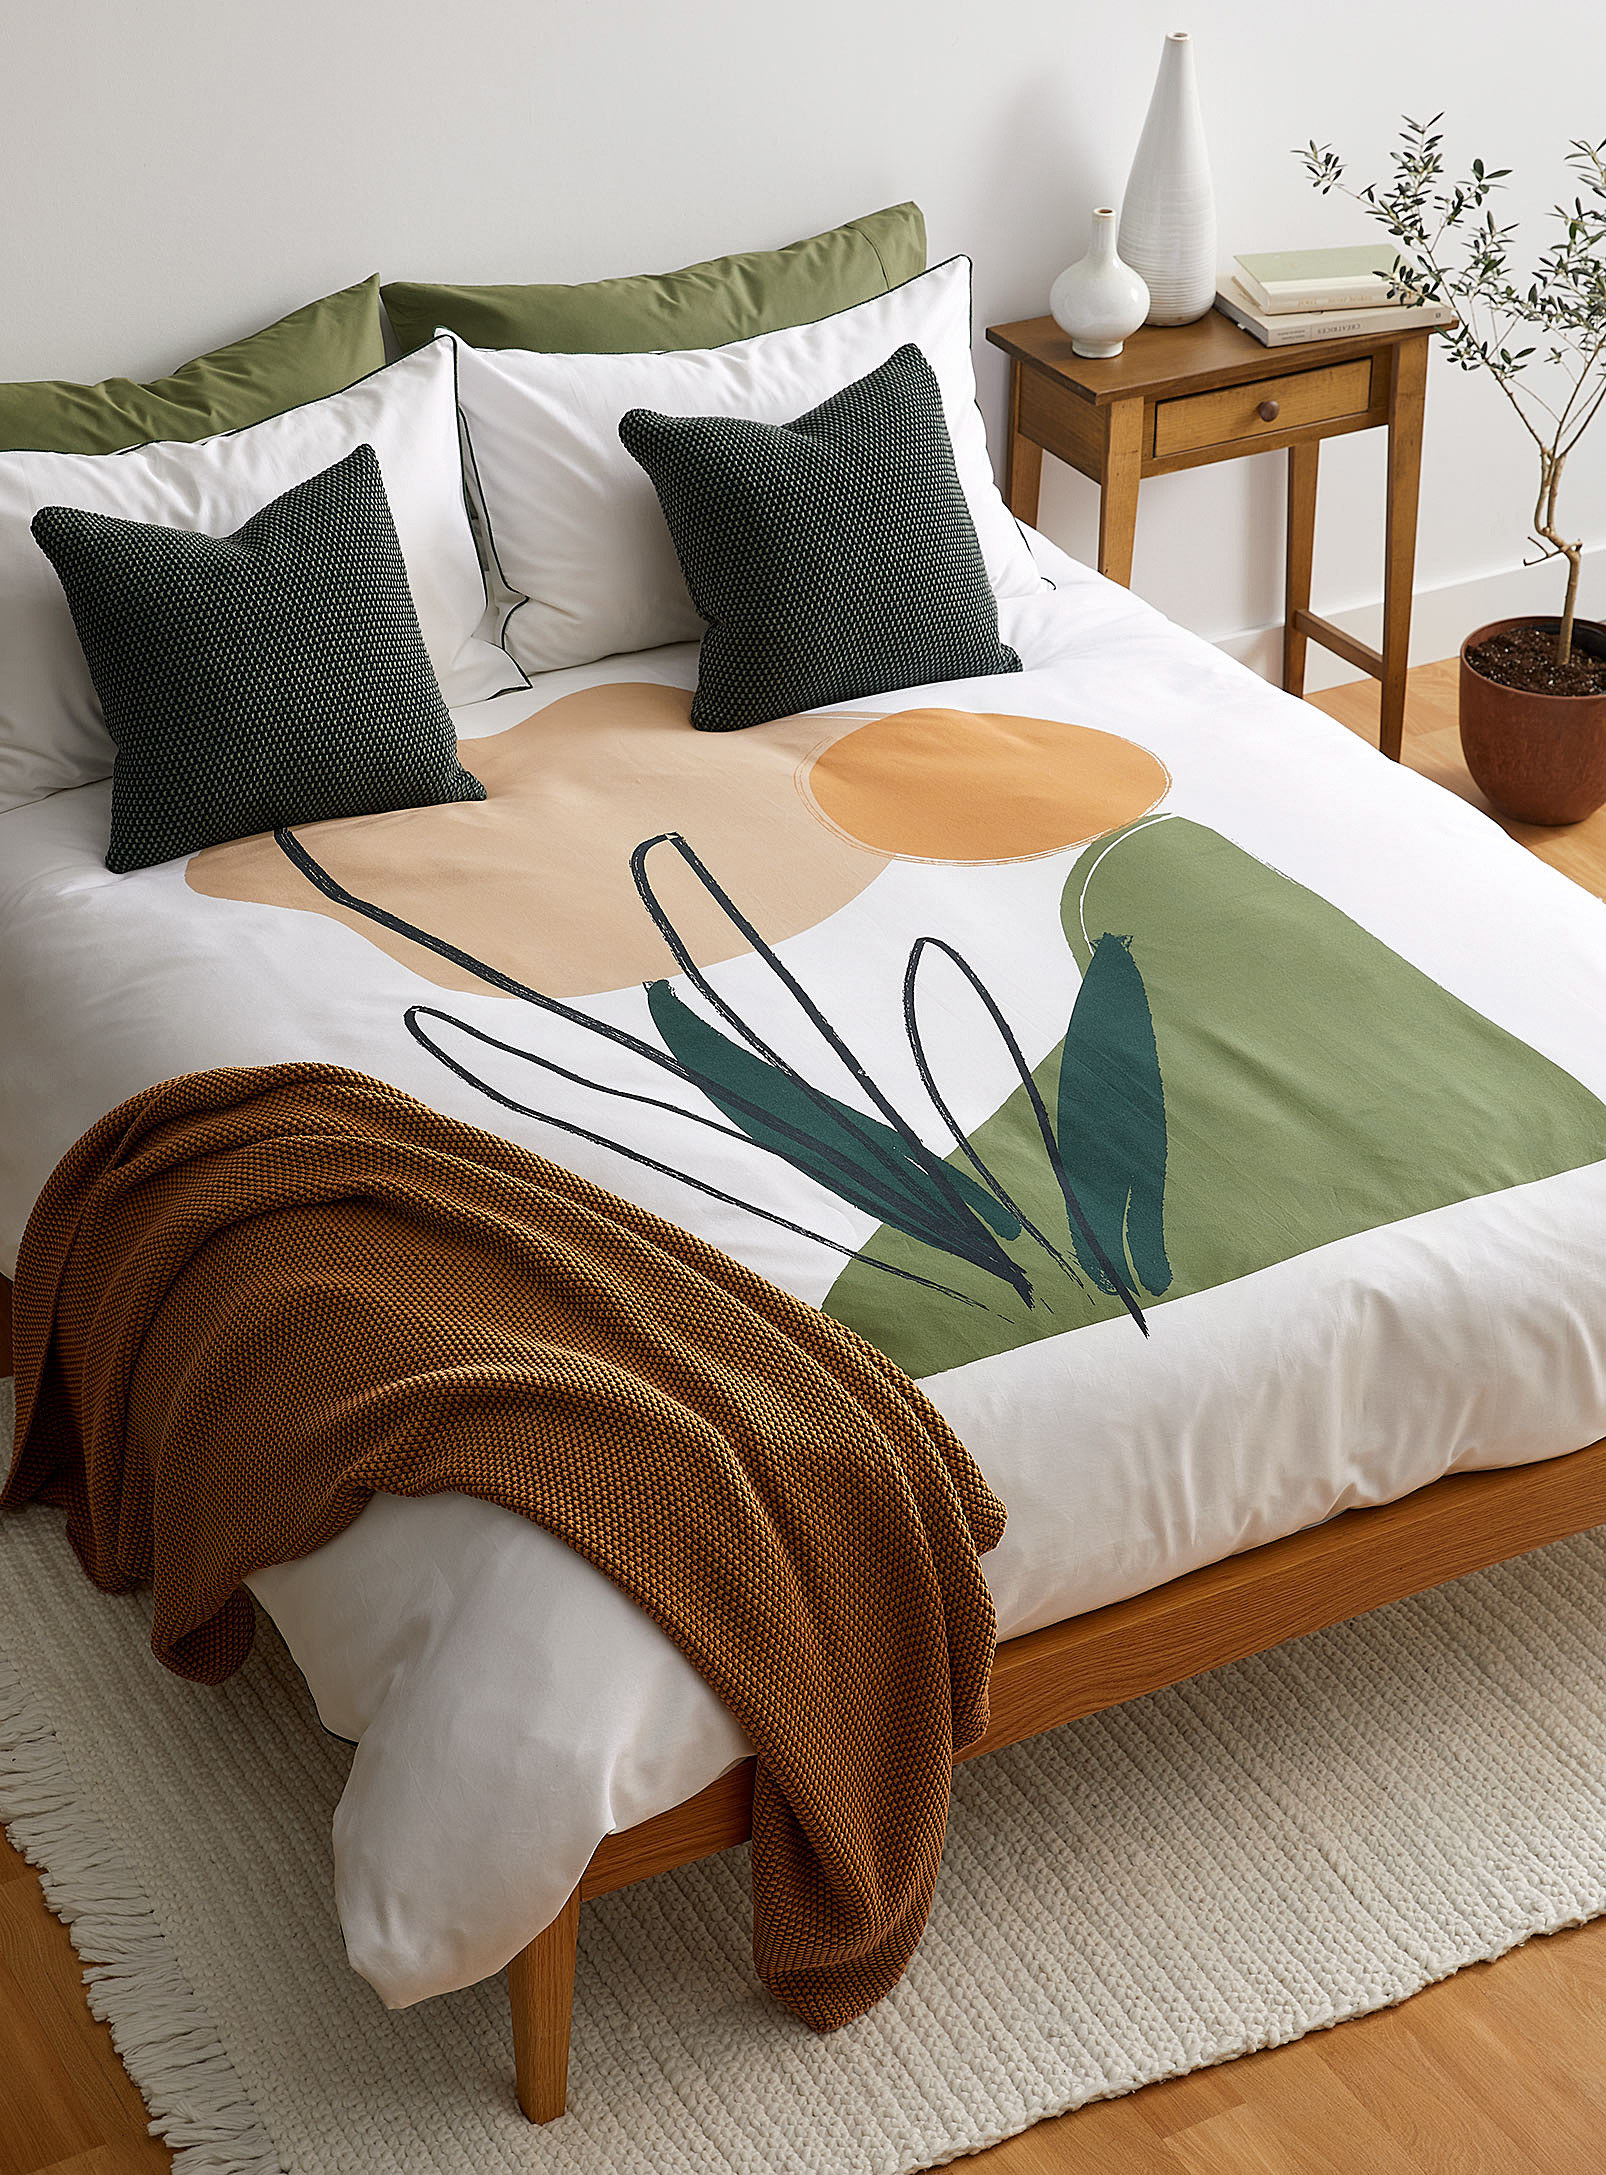 A duvet on a bed with tons of pillows on it